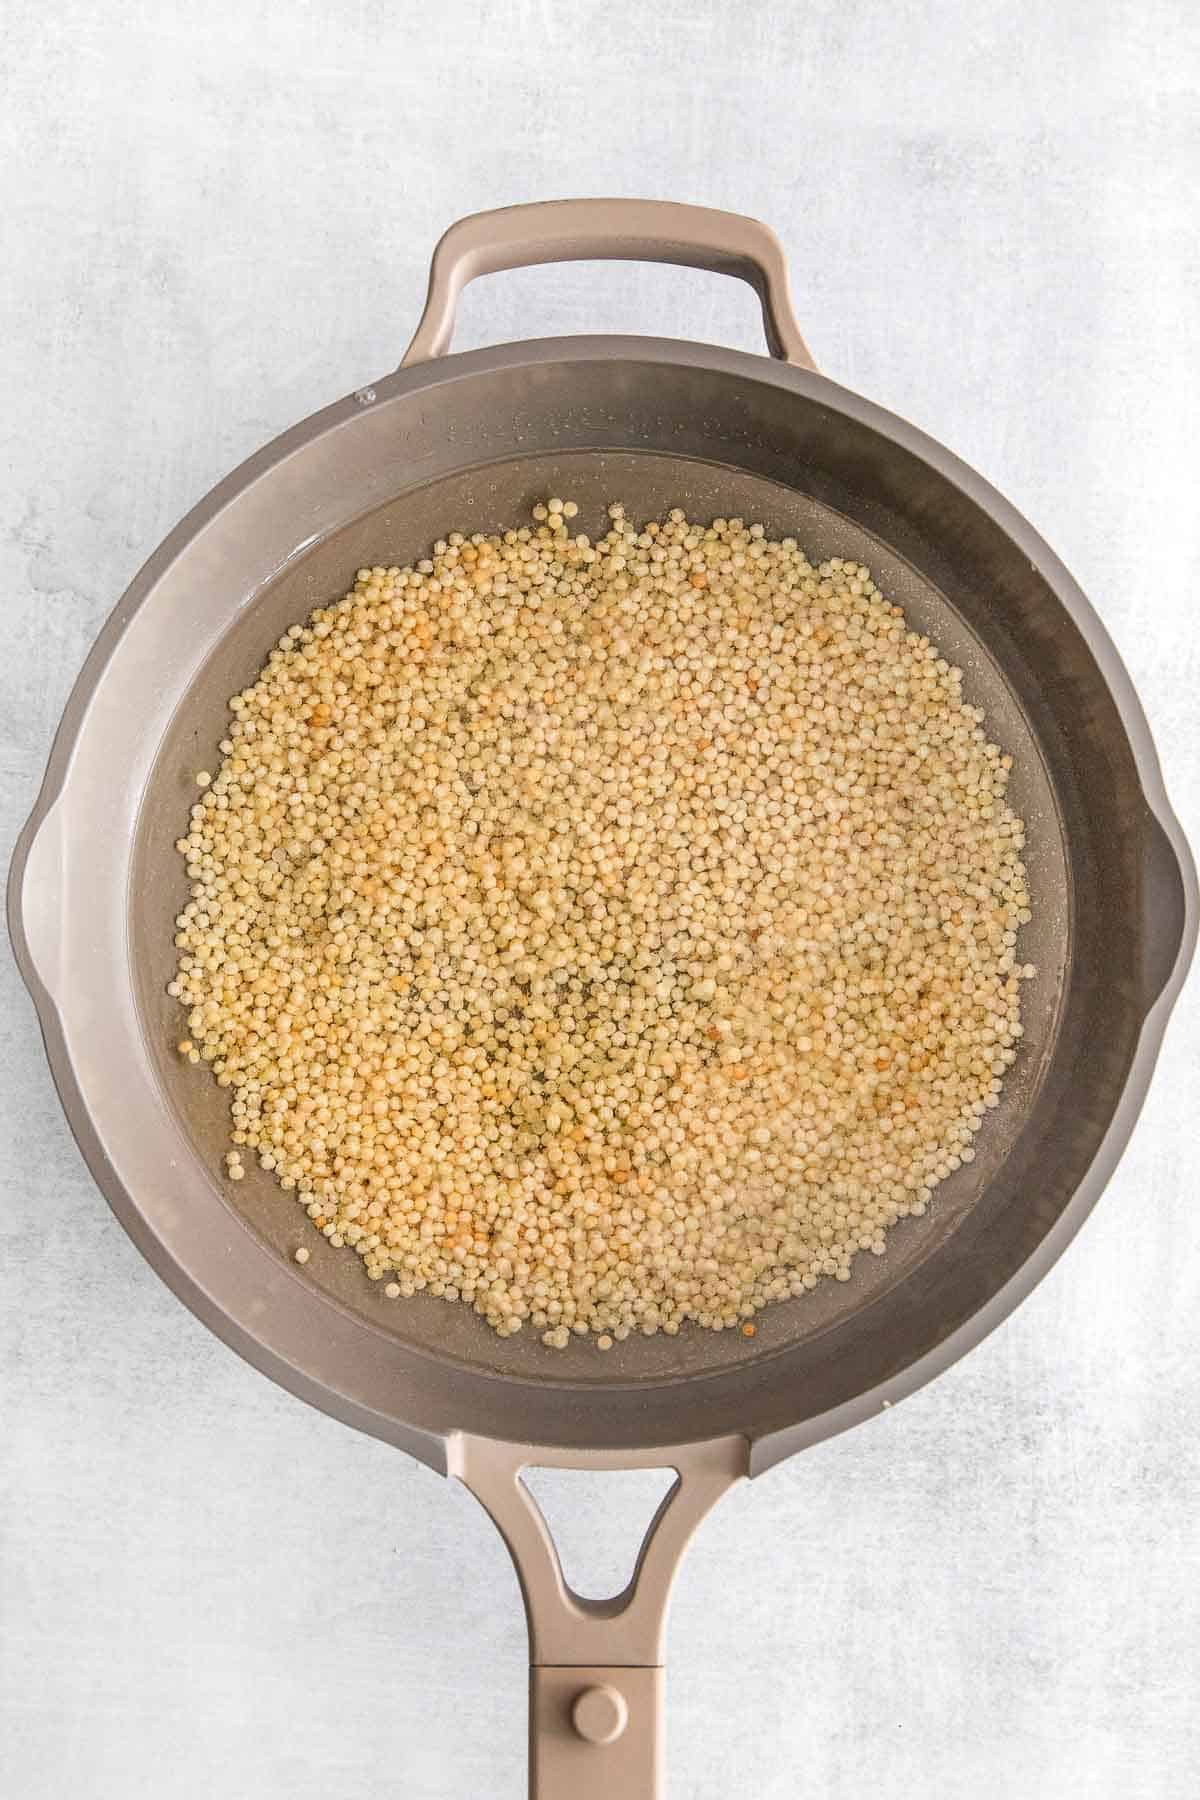 Couscous cooking in a large skillet.